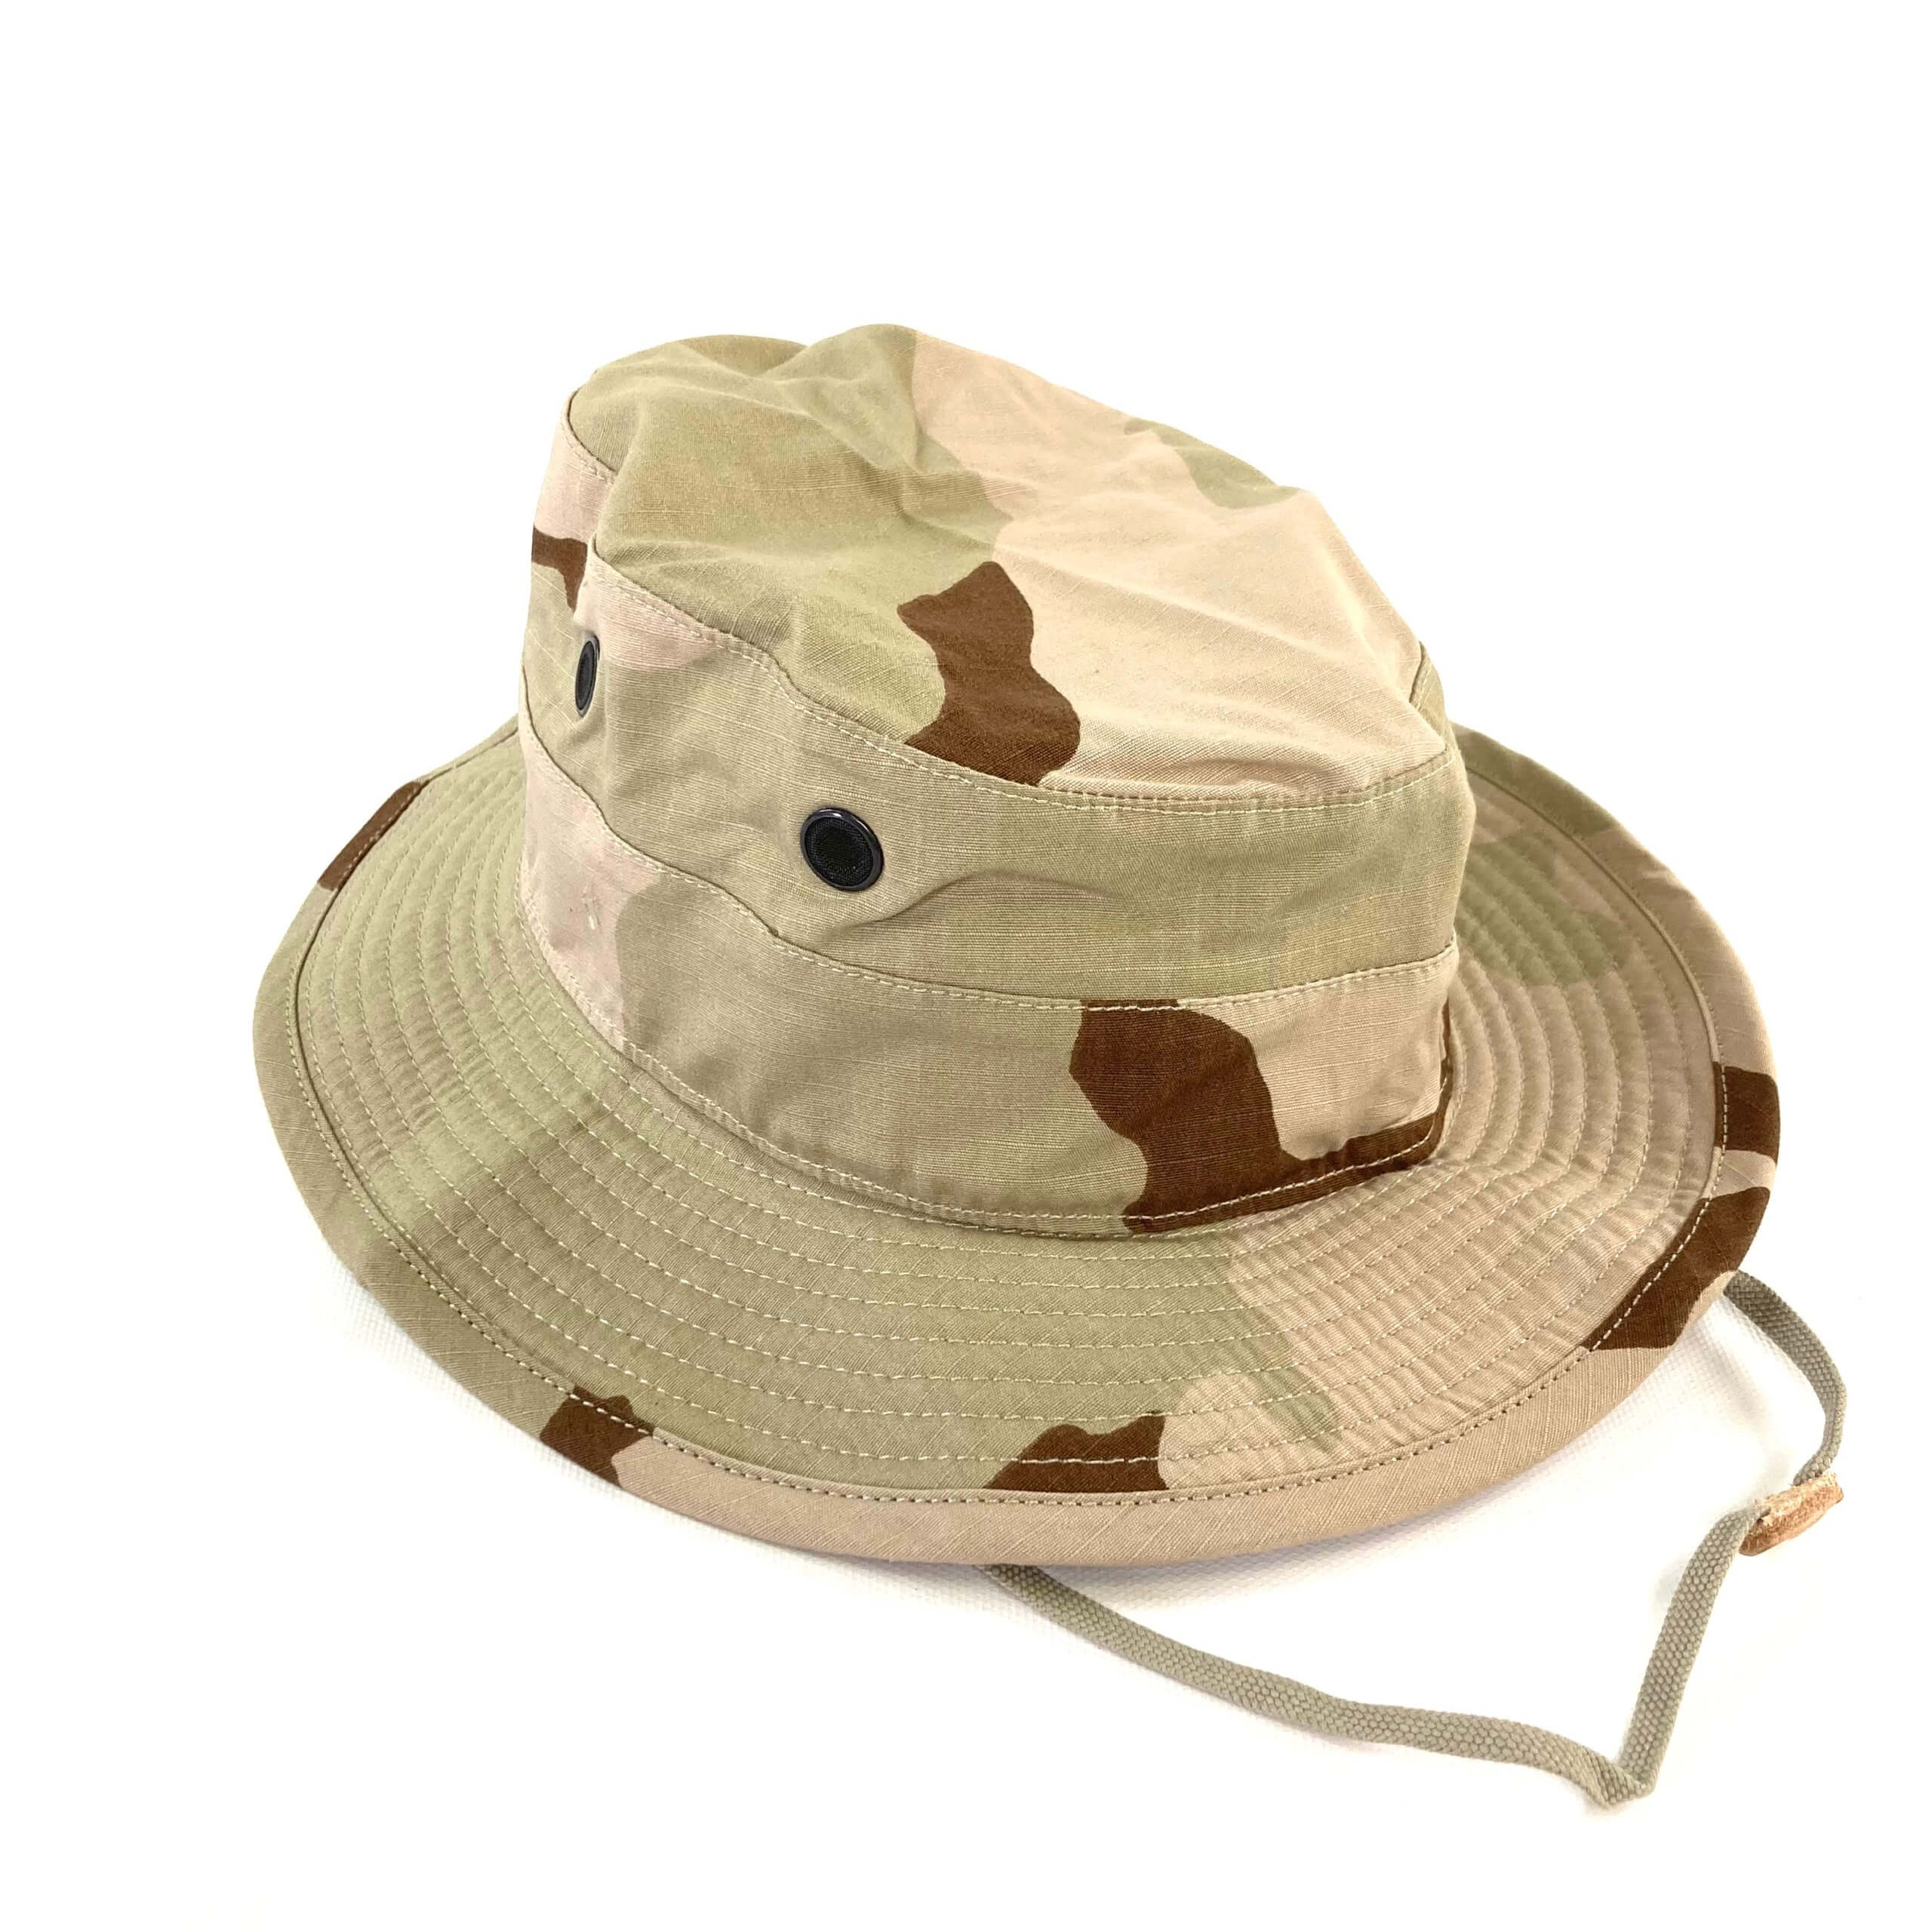 US Military Propper Multicam OCP Camouflage Boonie Sun Hat Size 7-1/4 